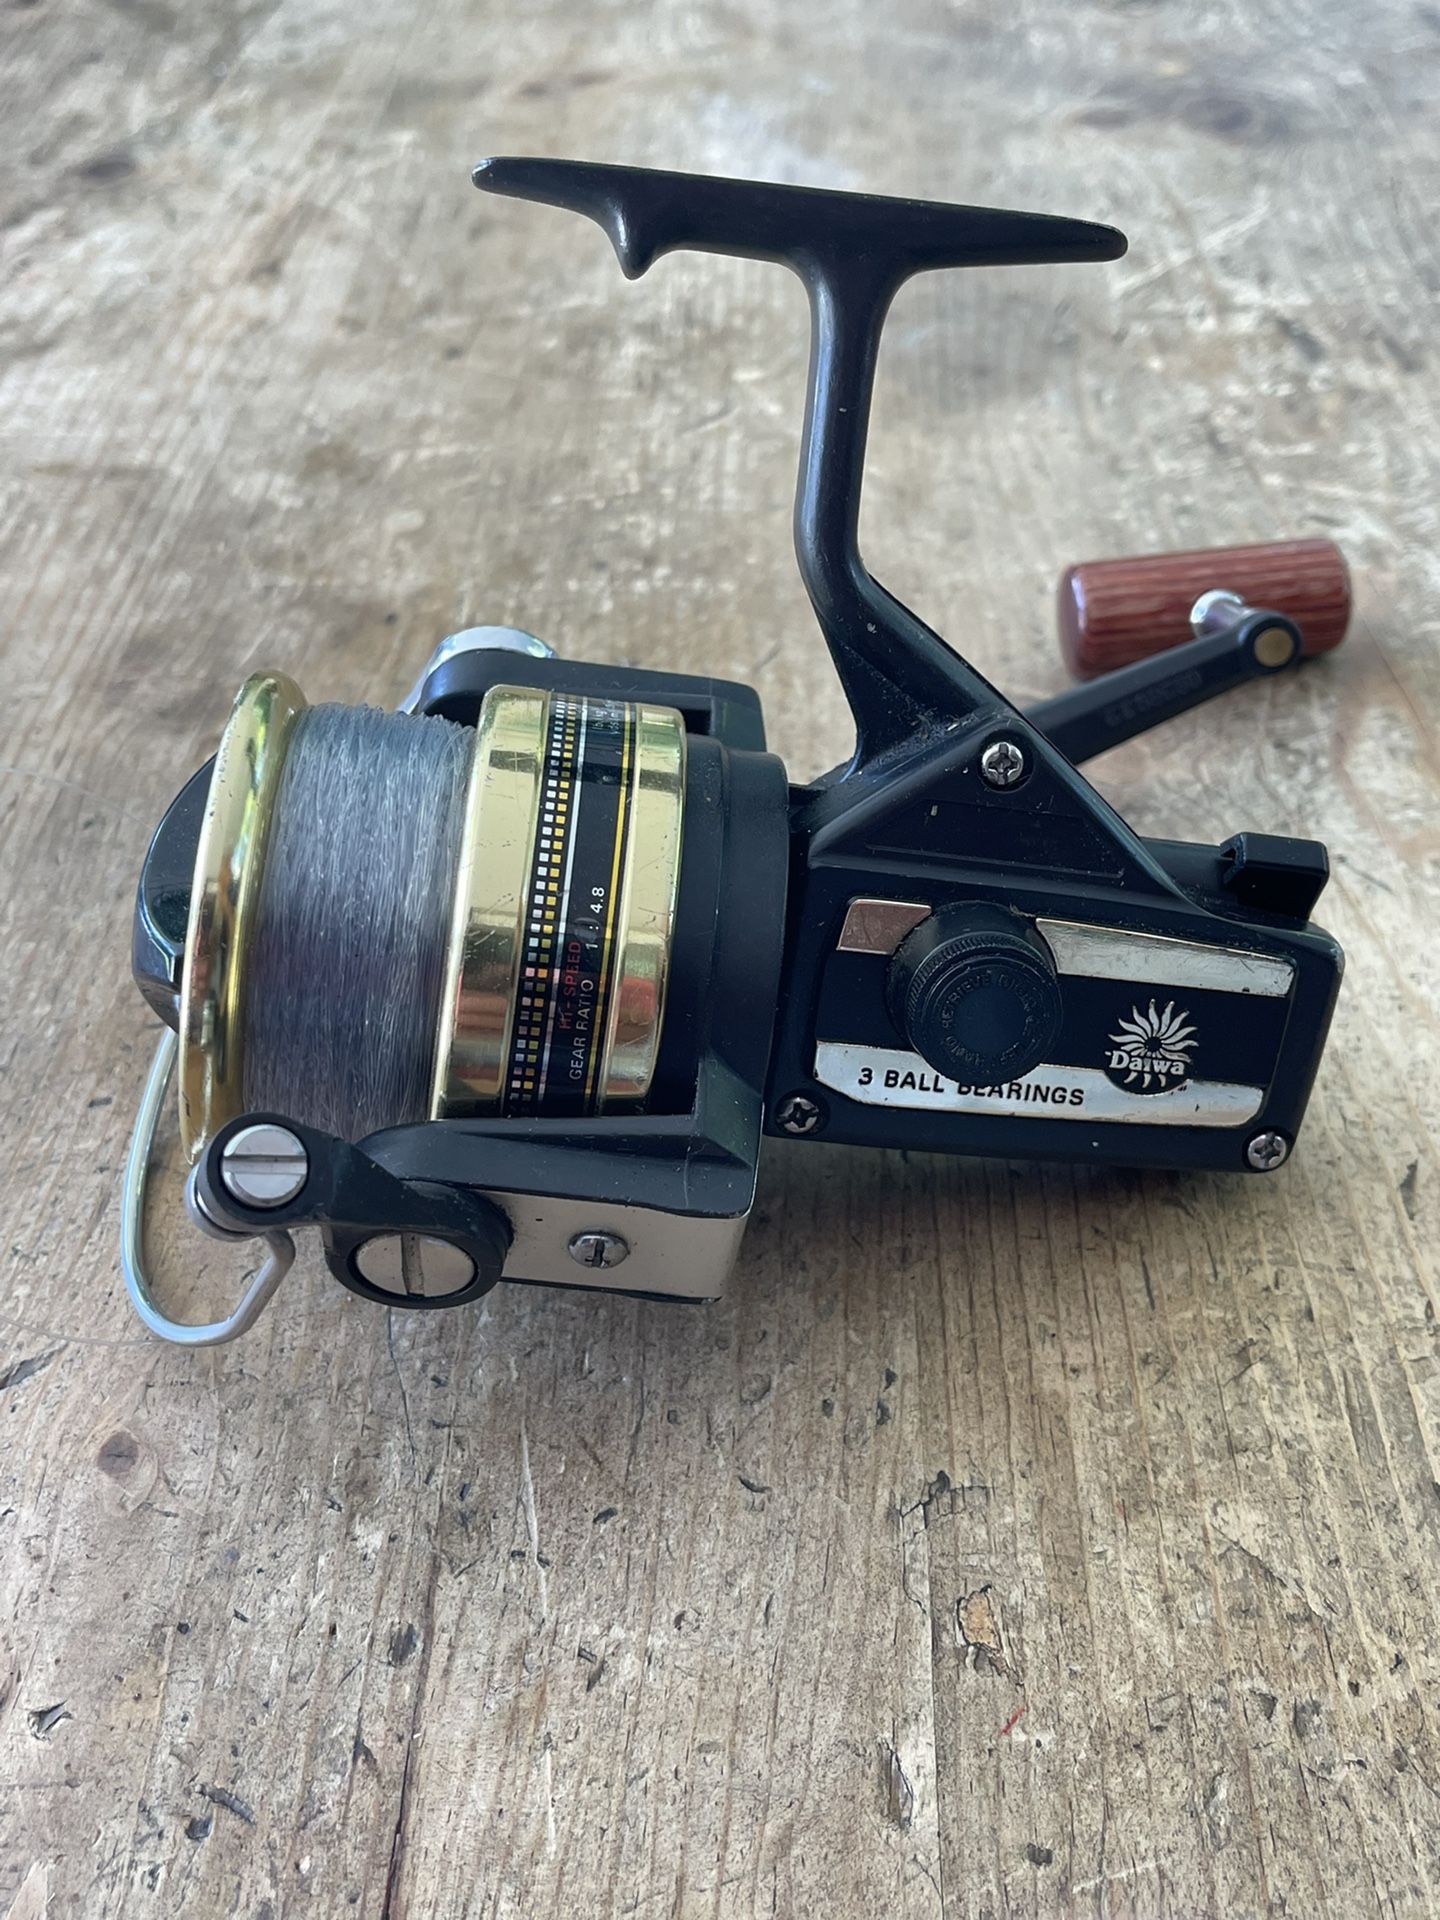 DAIWA BG30 SPINNING REEL for Sale in Westminster, CA - OfferUp